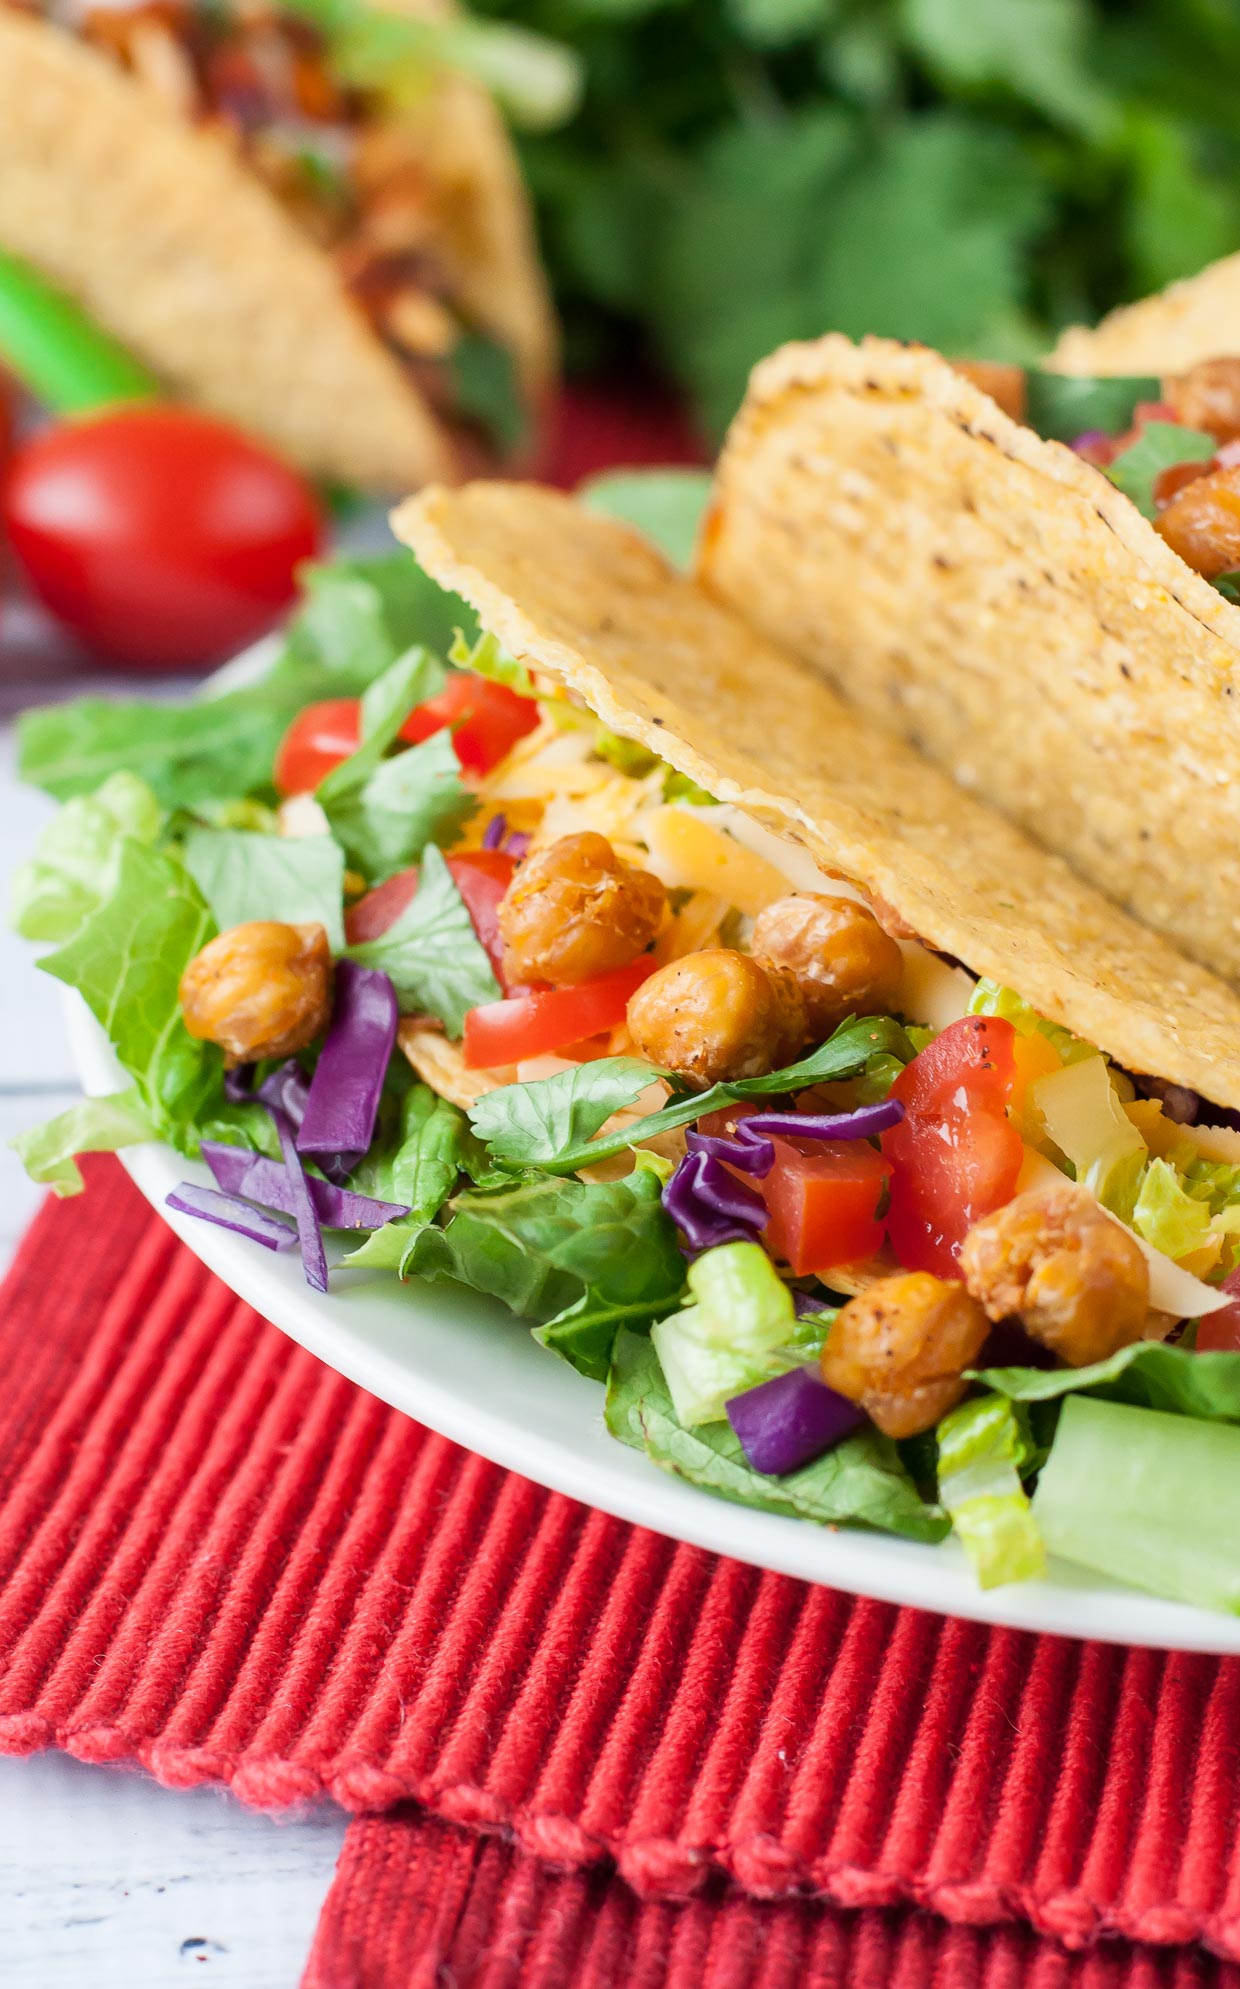 Seasoned black beans, pinto beans, and crunchy taco-roasted chickpeas team up to take your taco game to the next level with these tasty vegetarian triple bean tacos!